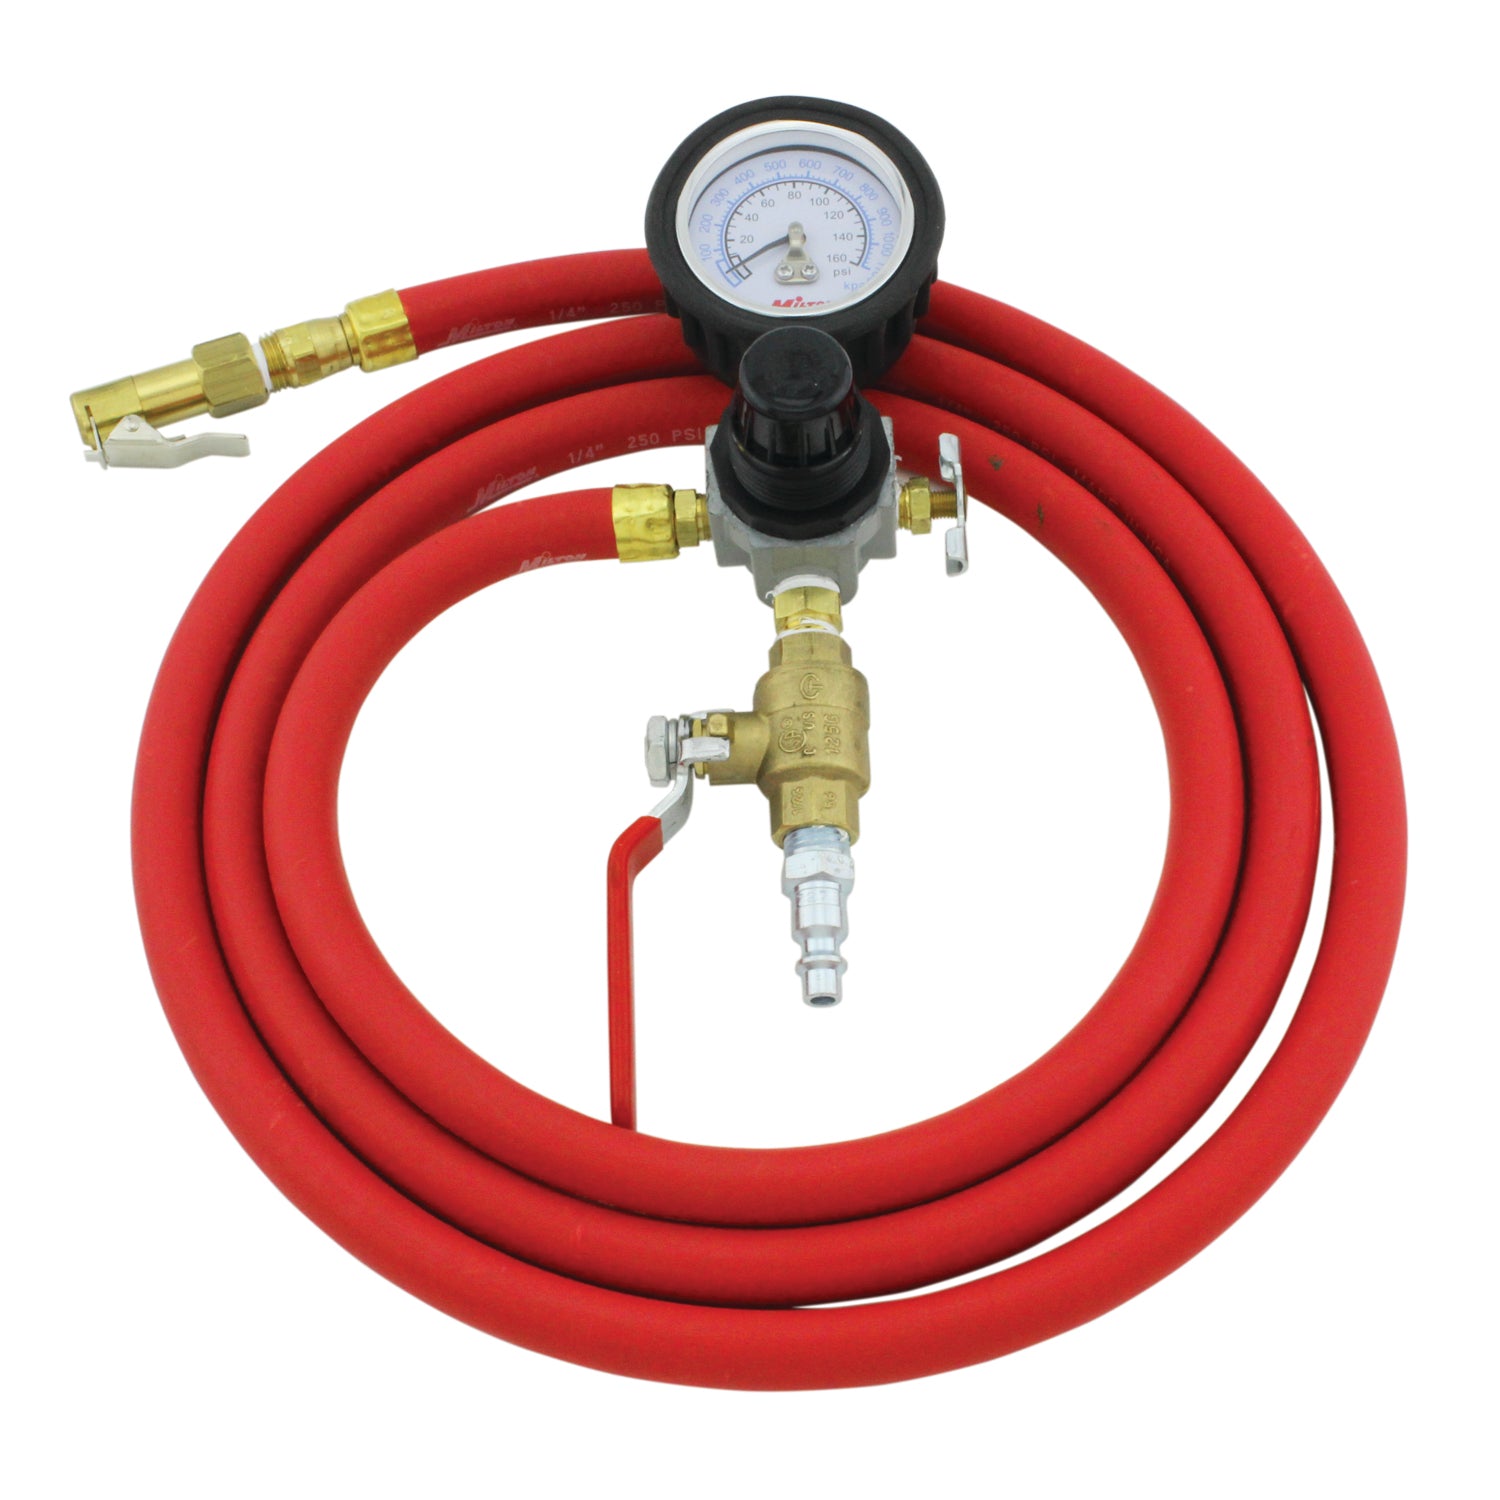 HD Truck Inflator Gauge, 7 ft. Rubber Air Hose, Easy On Grip, 10 - 160 PSI